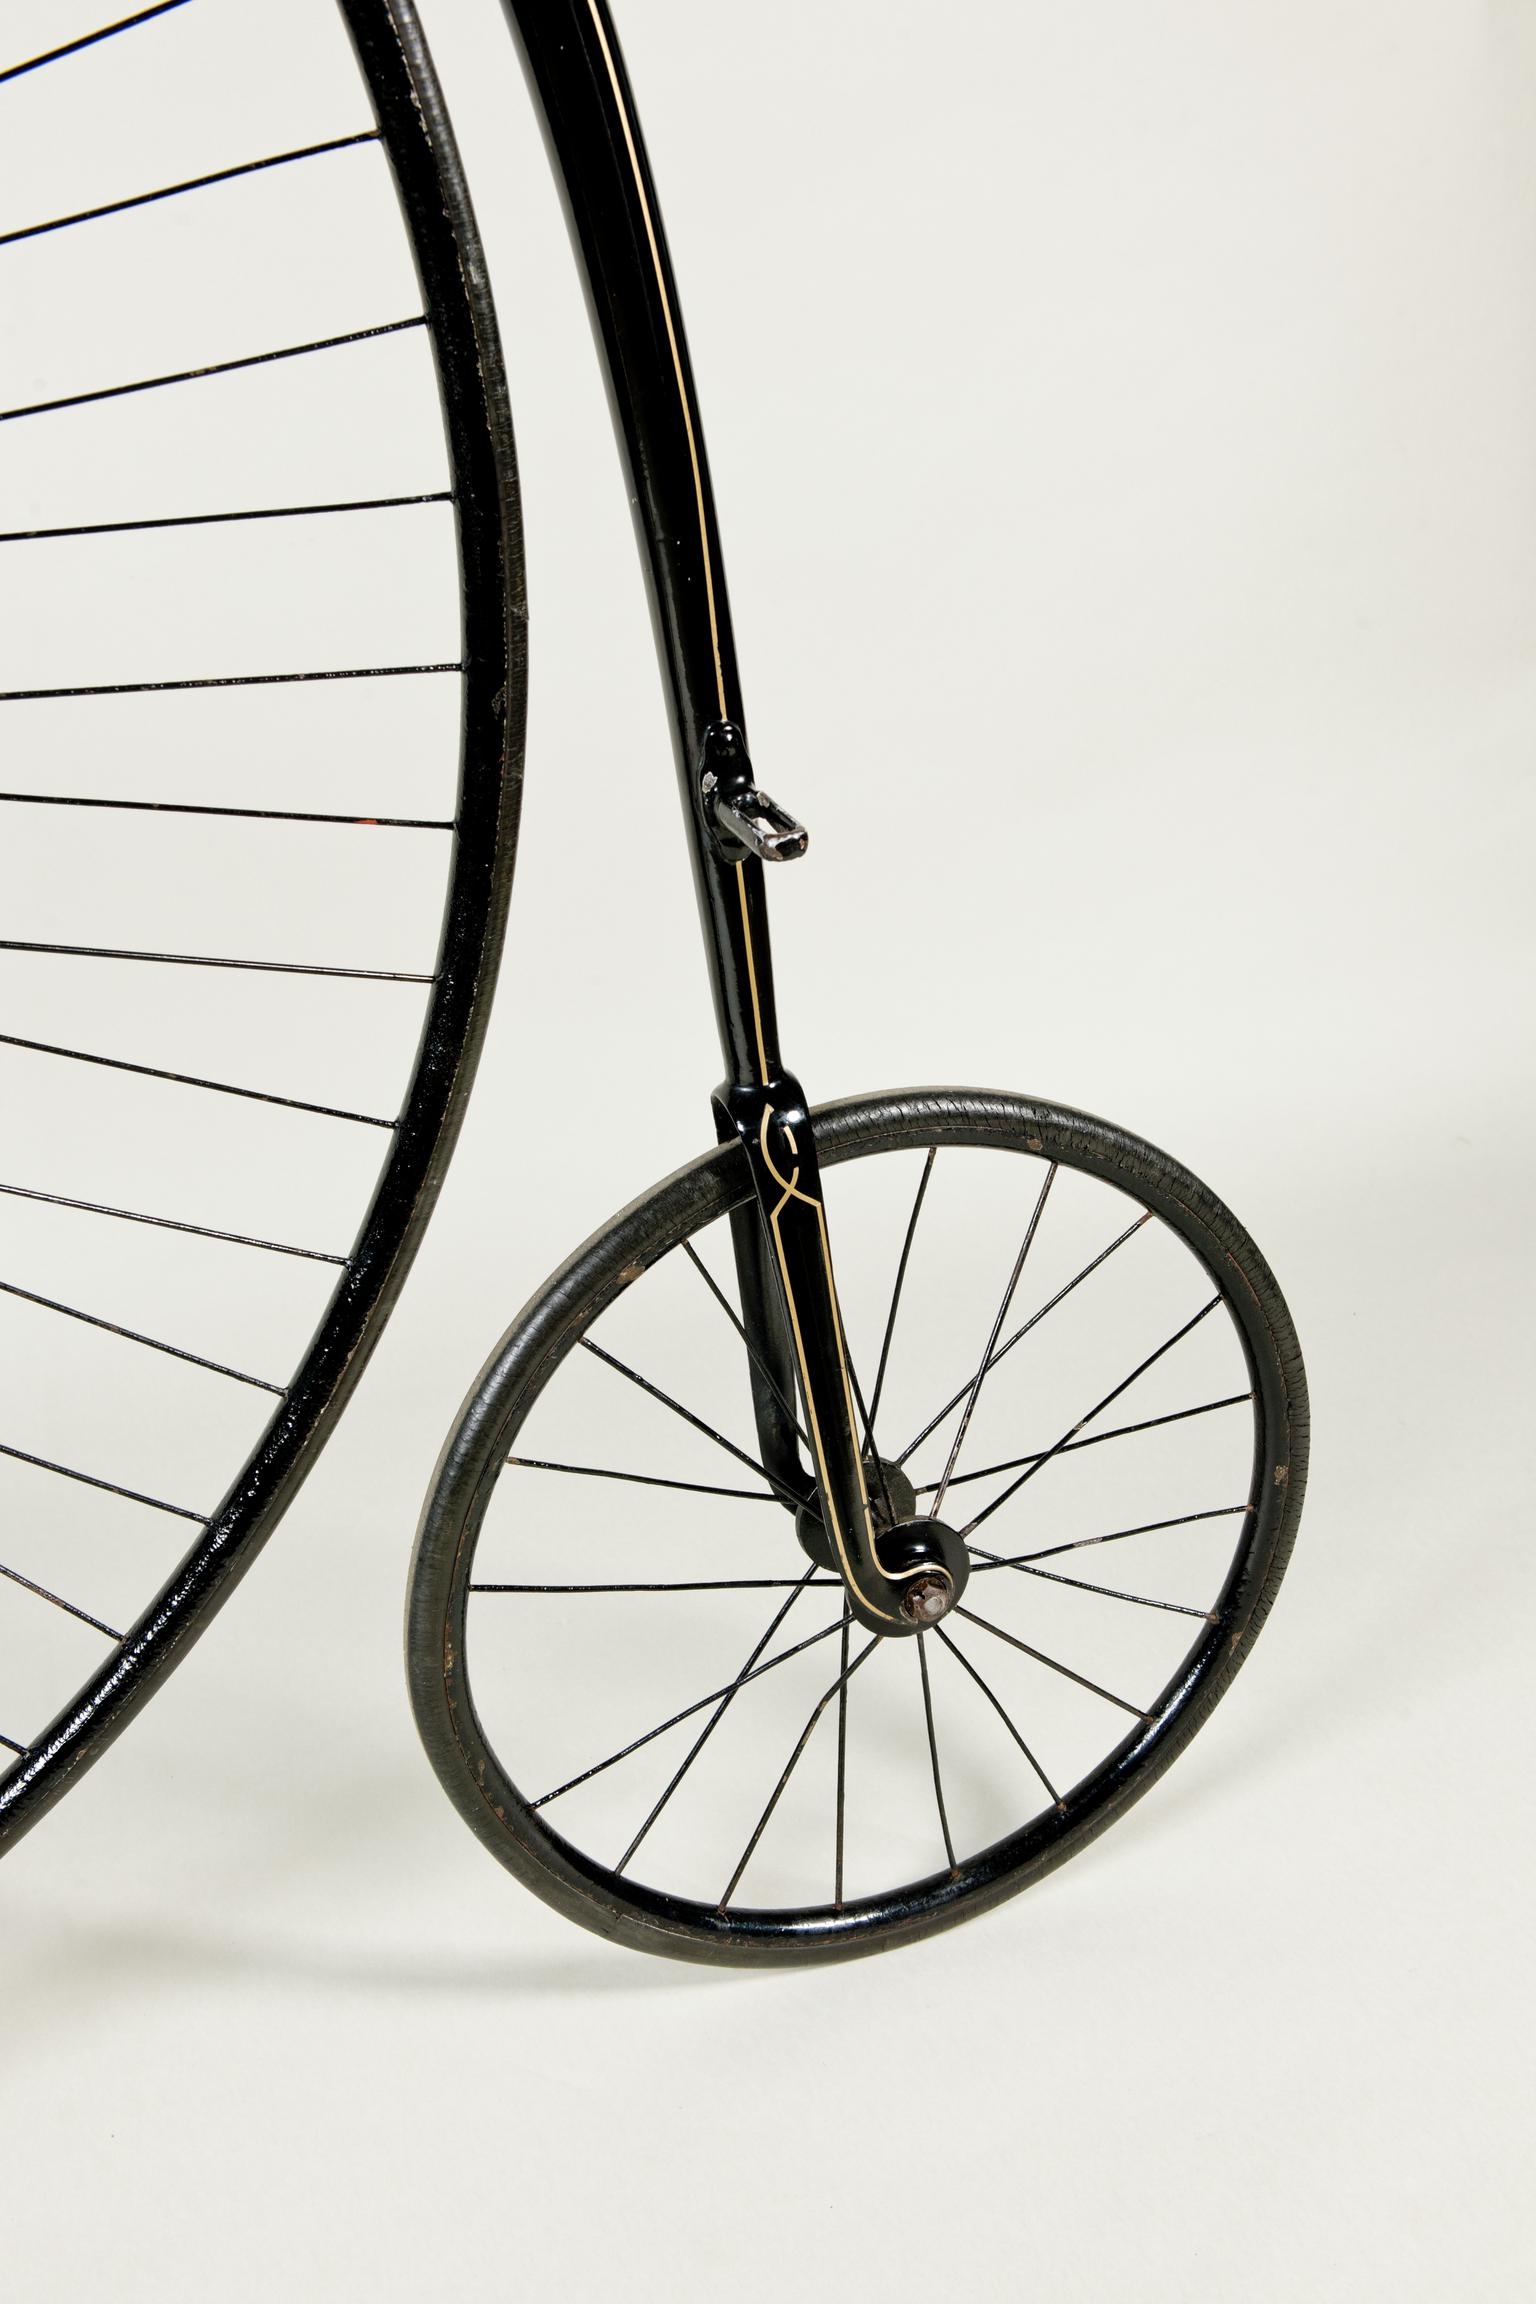 Penny farthing ordinary bicycle